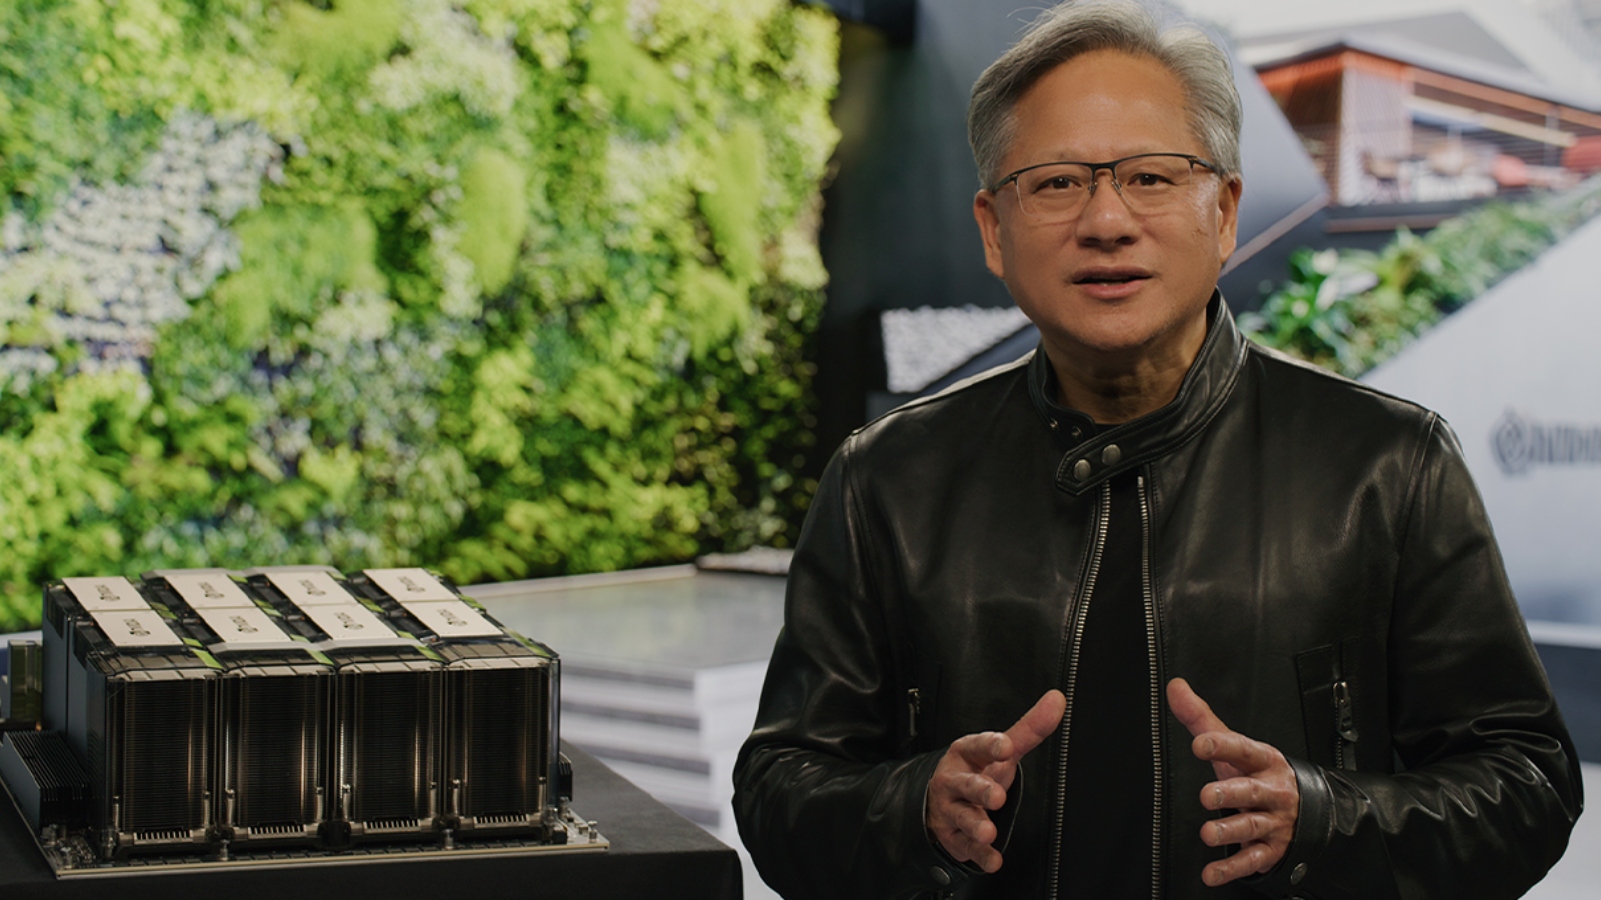 NVIDIA CEO Jensen Huang speaking at the GPU Technology Conference, March 2023. Photo courtesy of NVIDIA